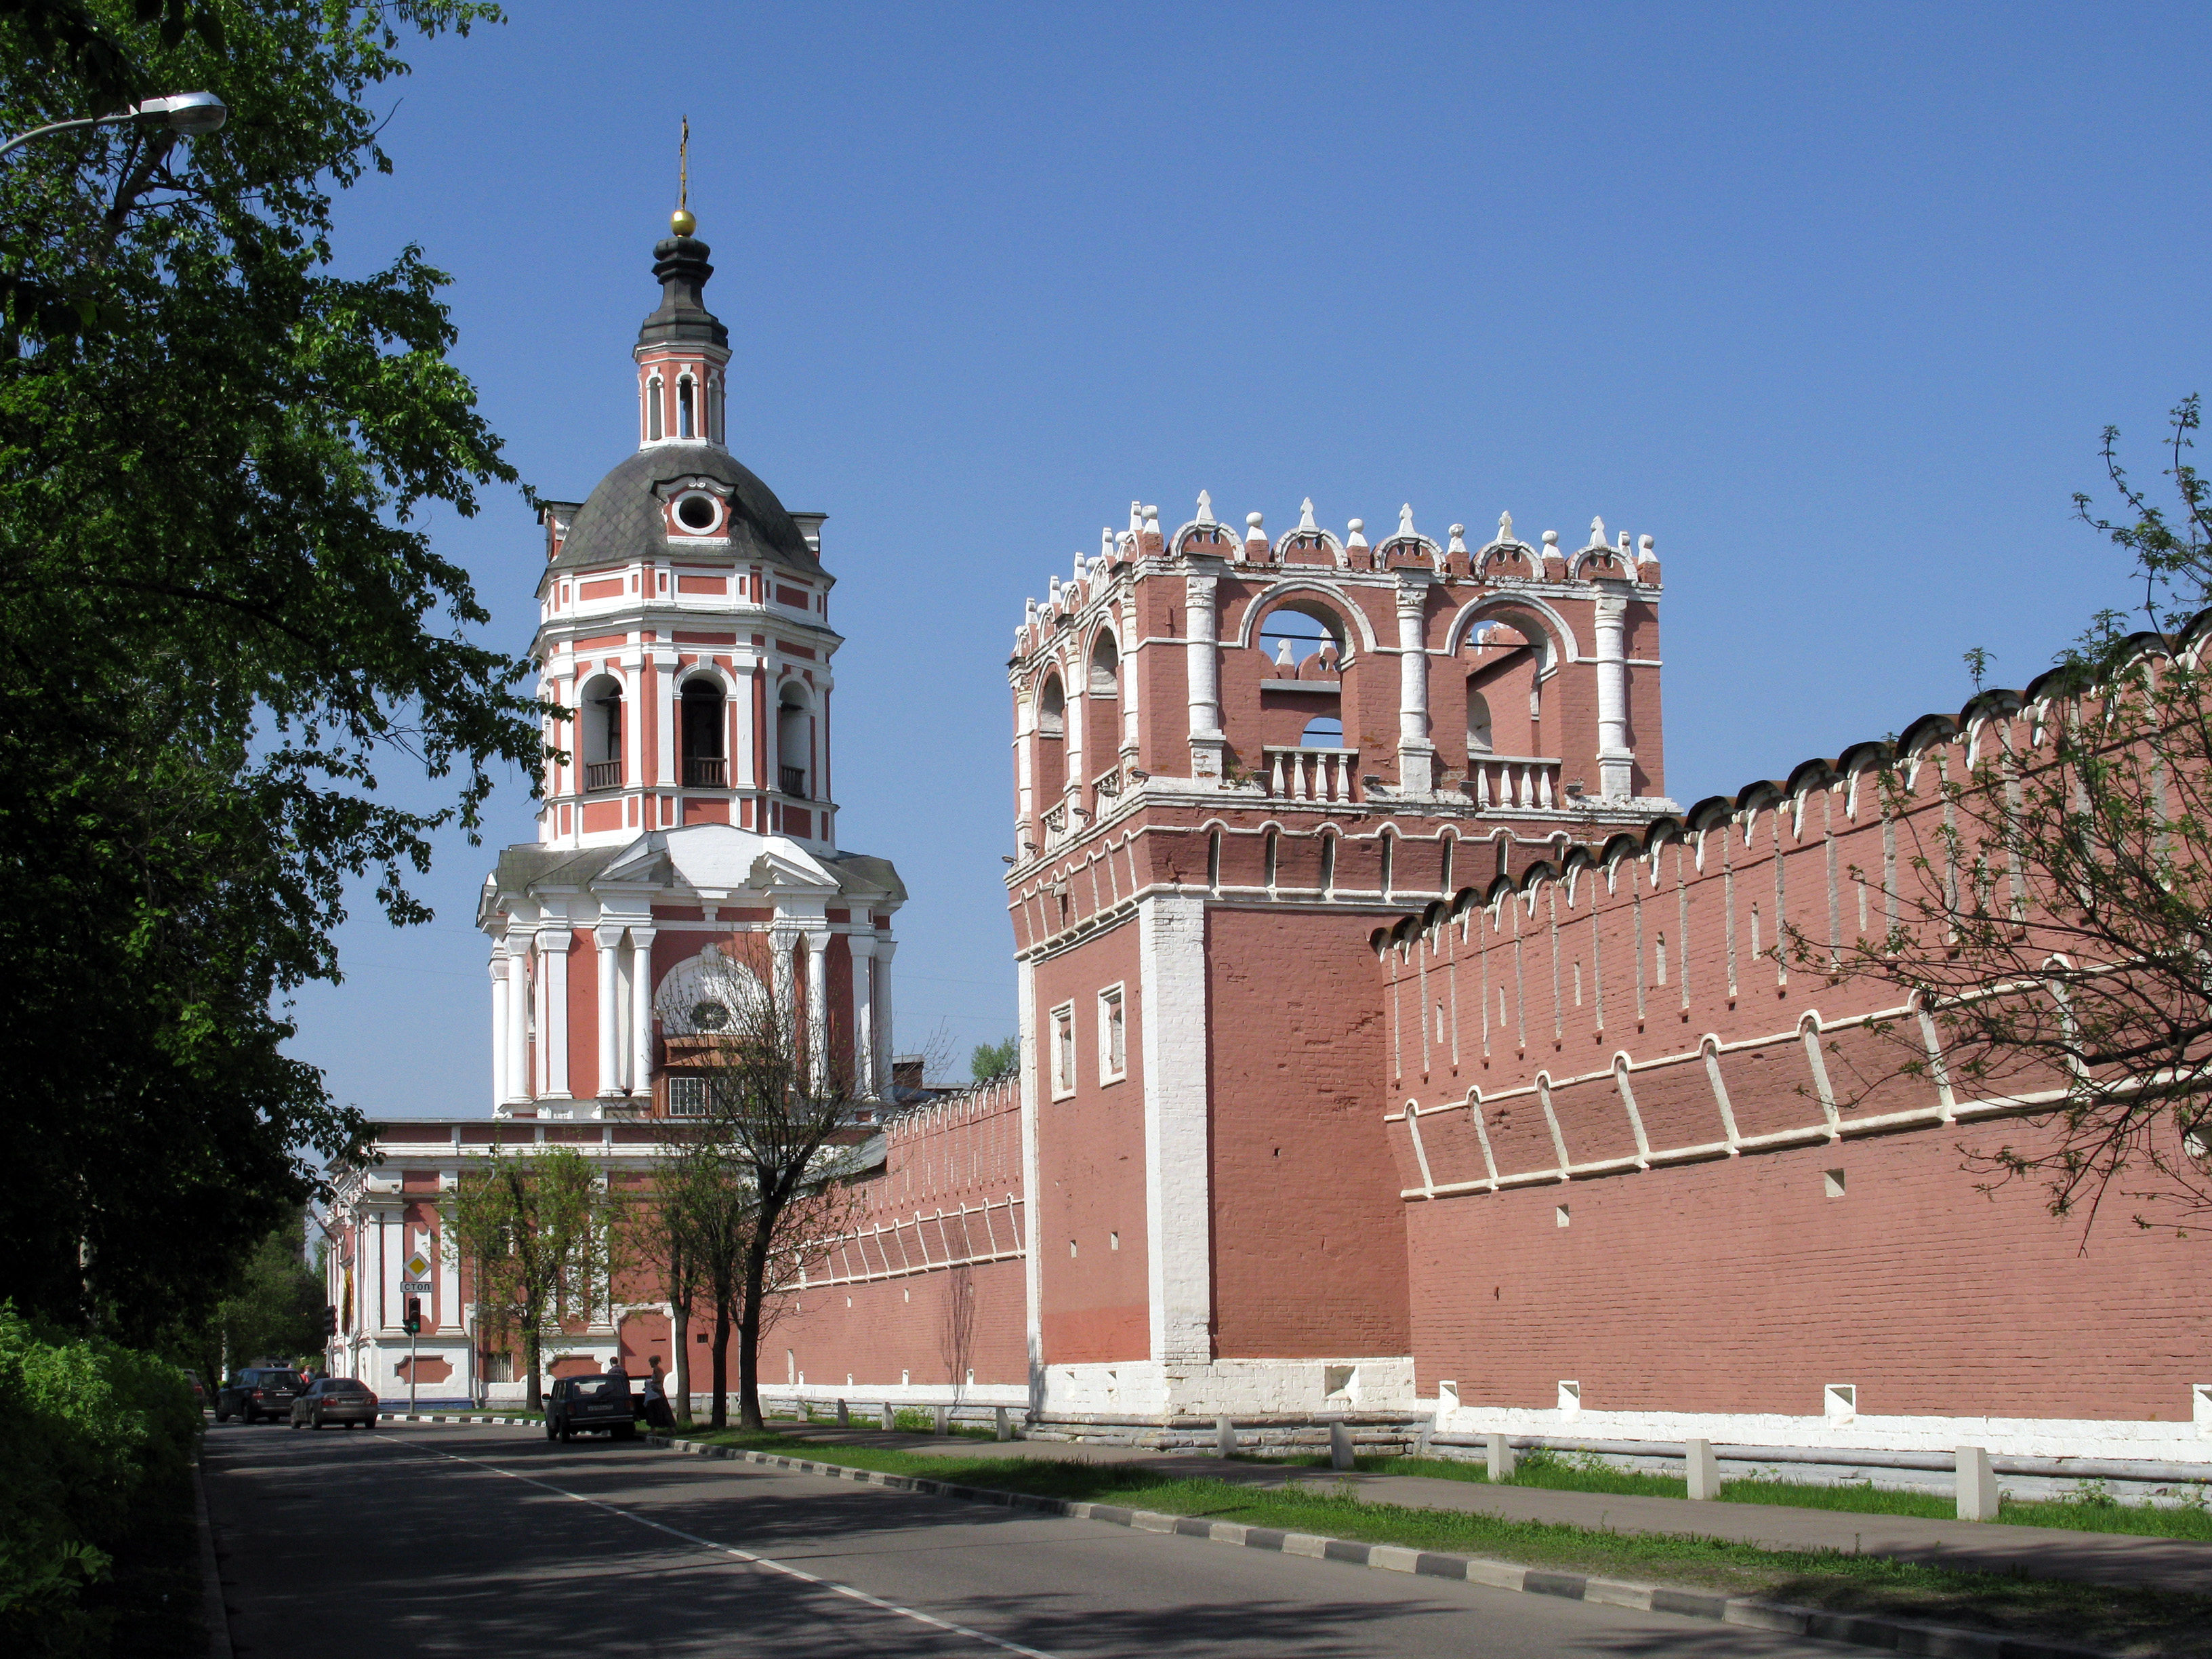 Walls_and_towers_of_Donskoy_Monastery_05.jpg